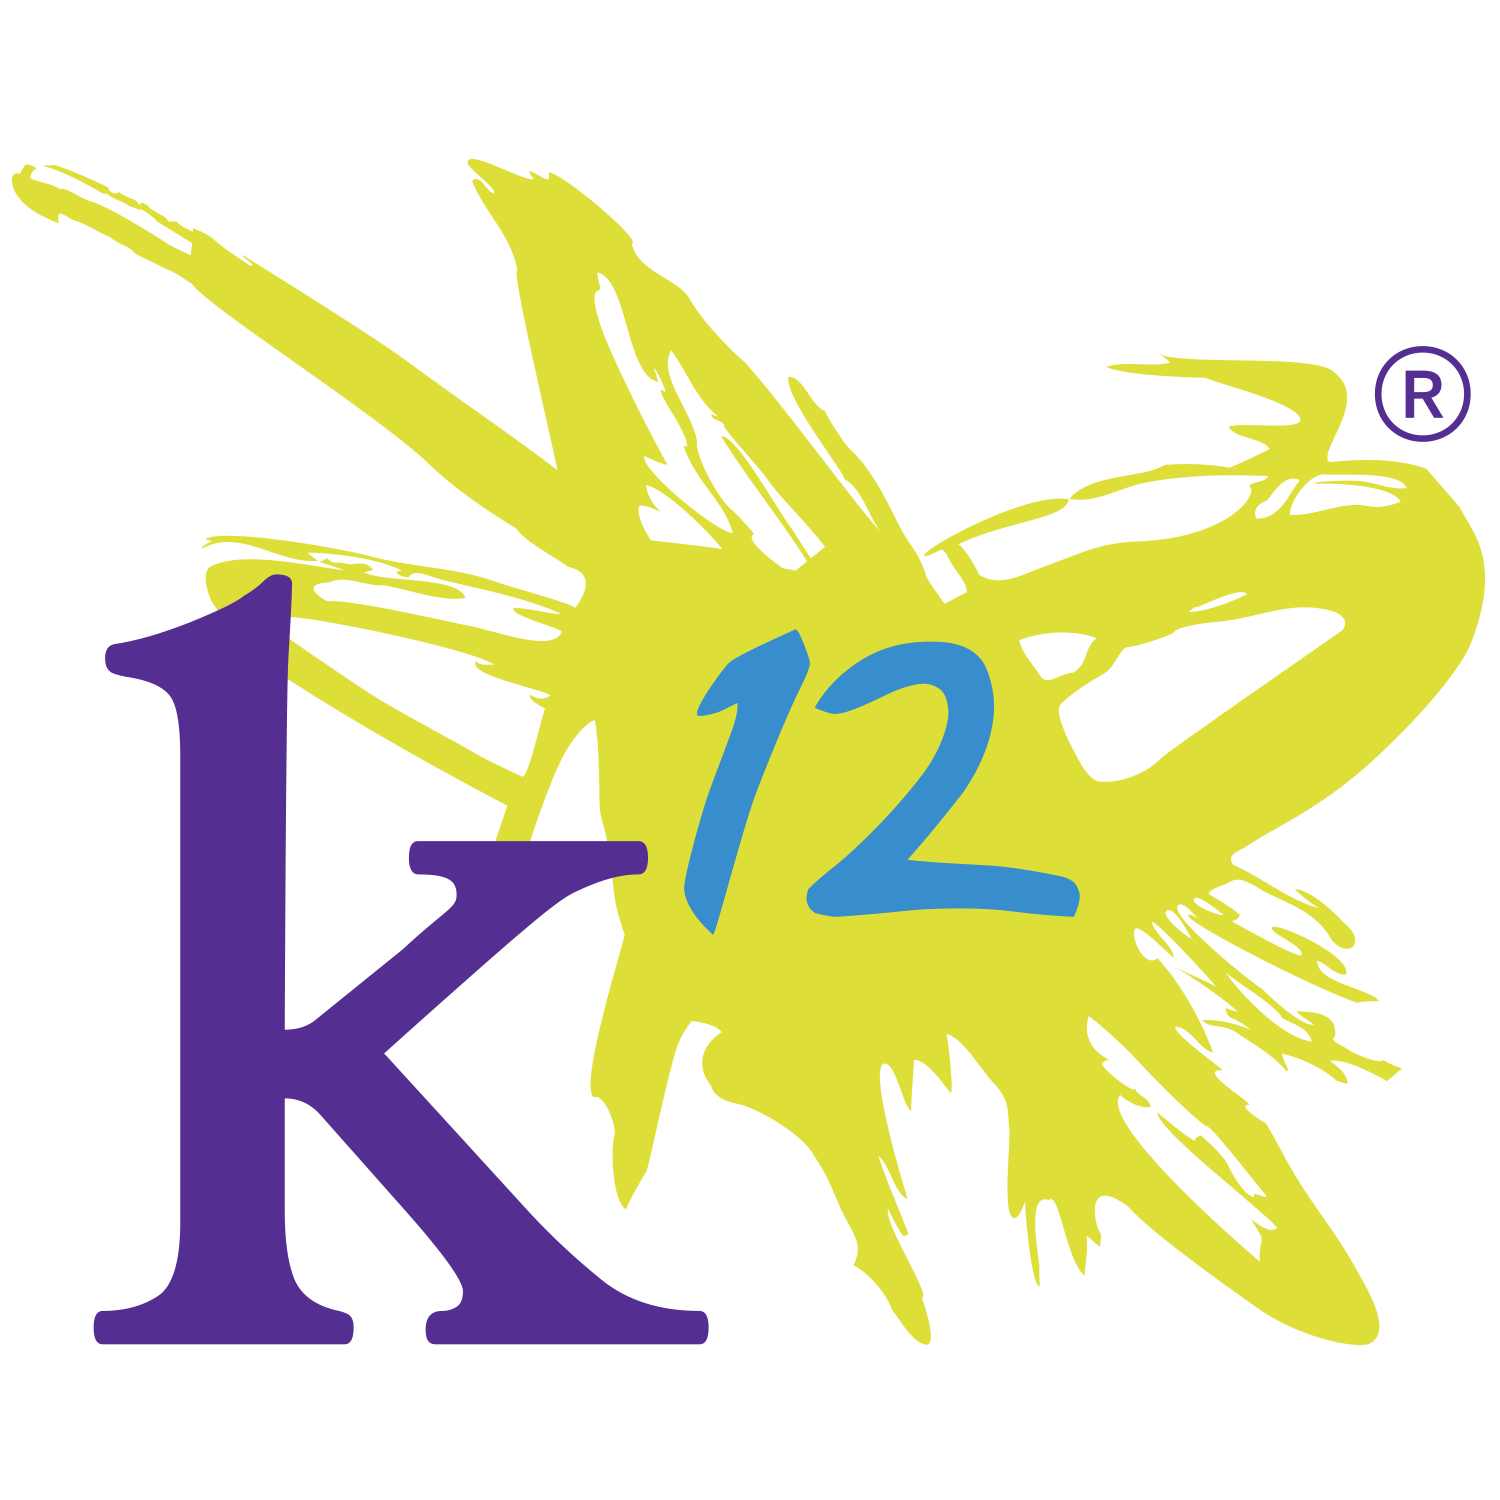 thesis about k-12 implementation